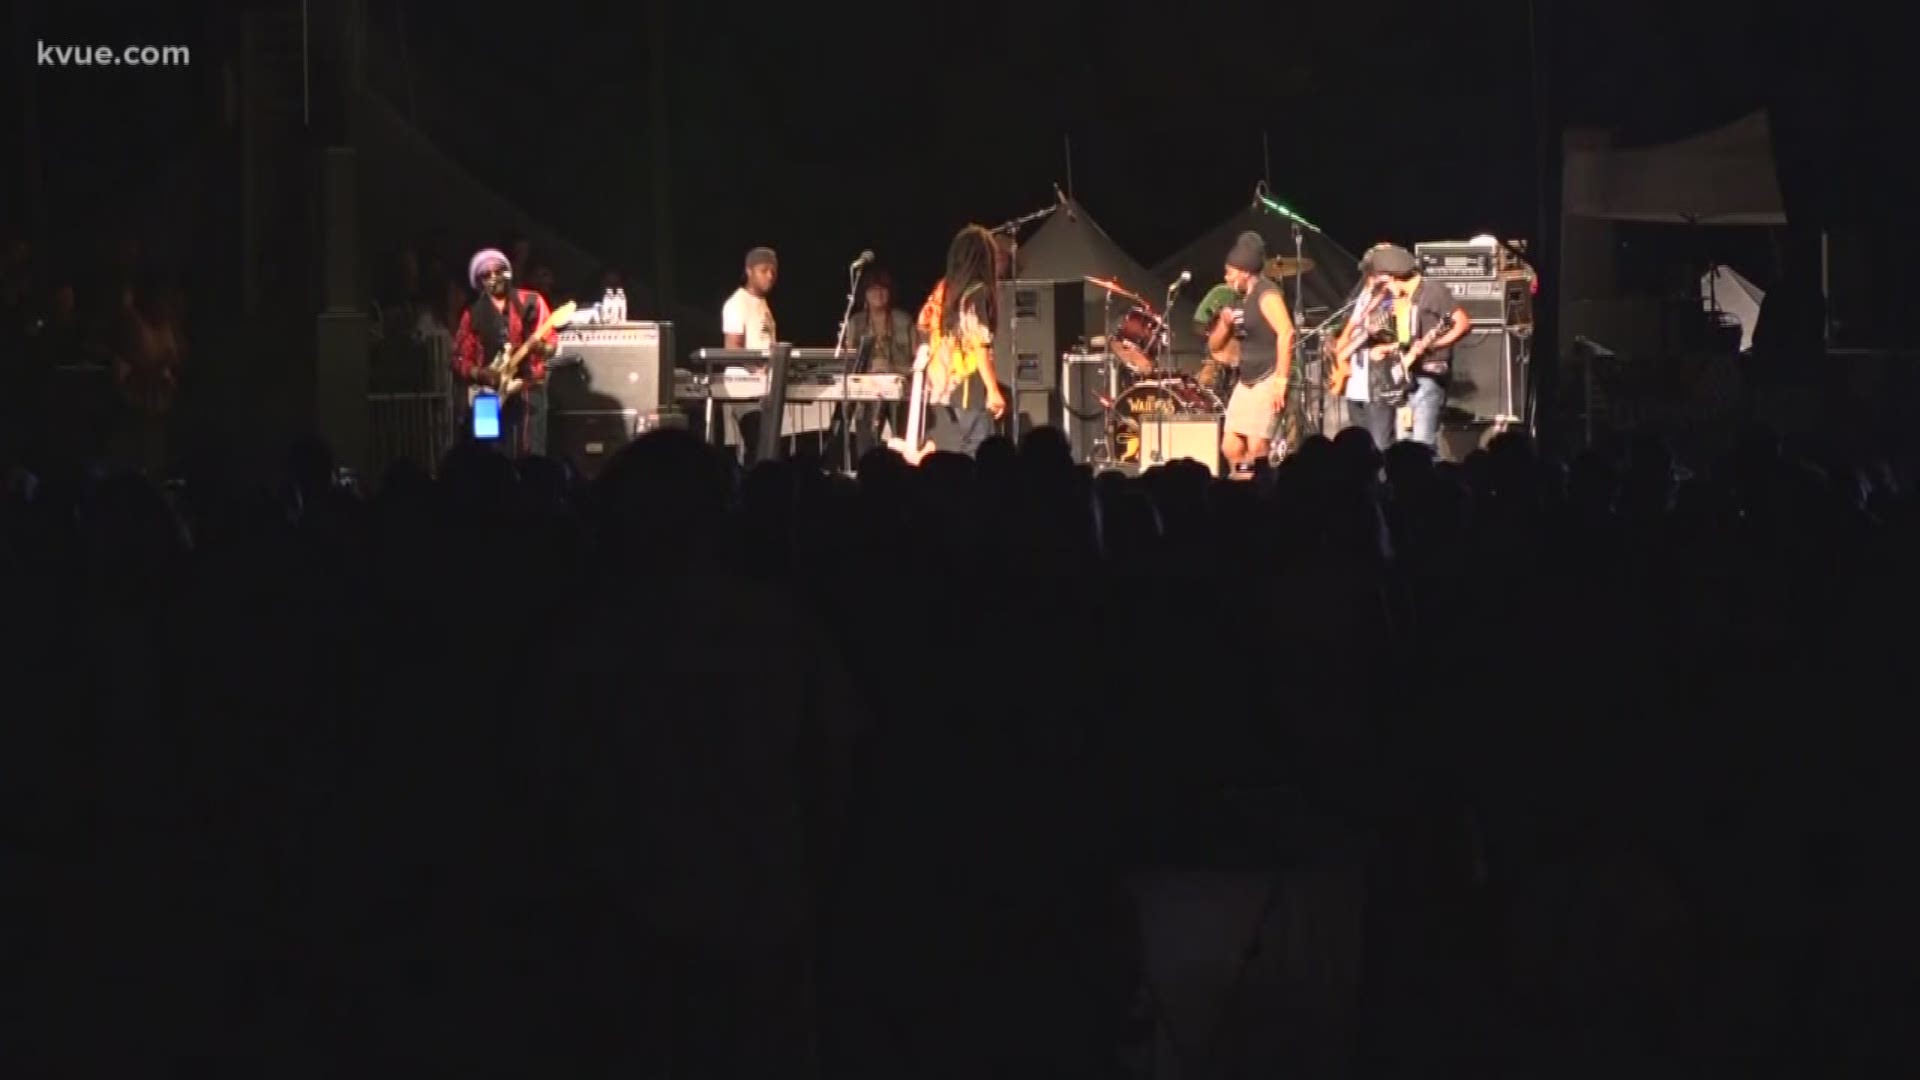 Austin Reggae Festival wraps up another year at Auditorium Shores Some of Bob Marley's old bandmates closed out this year's edition.